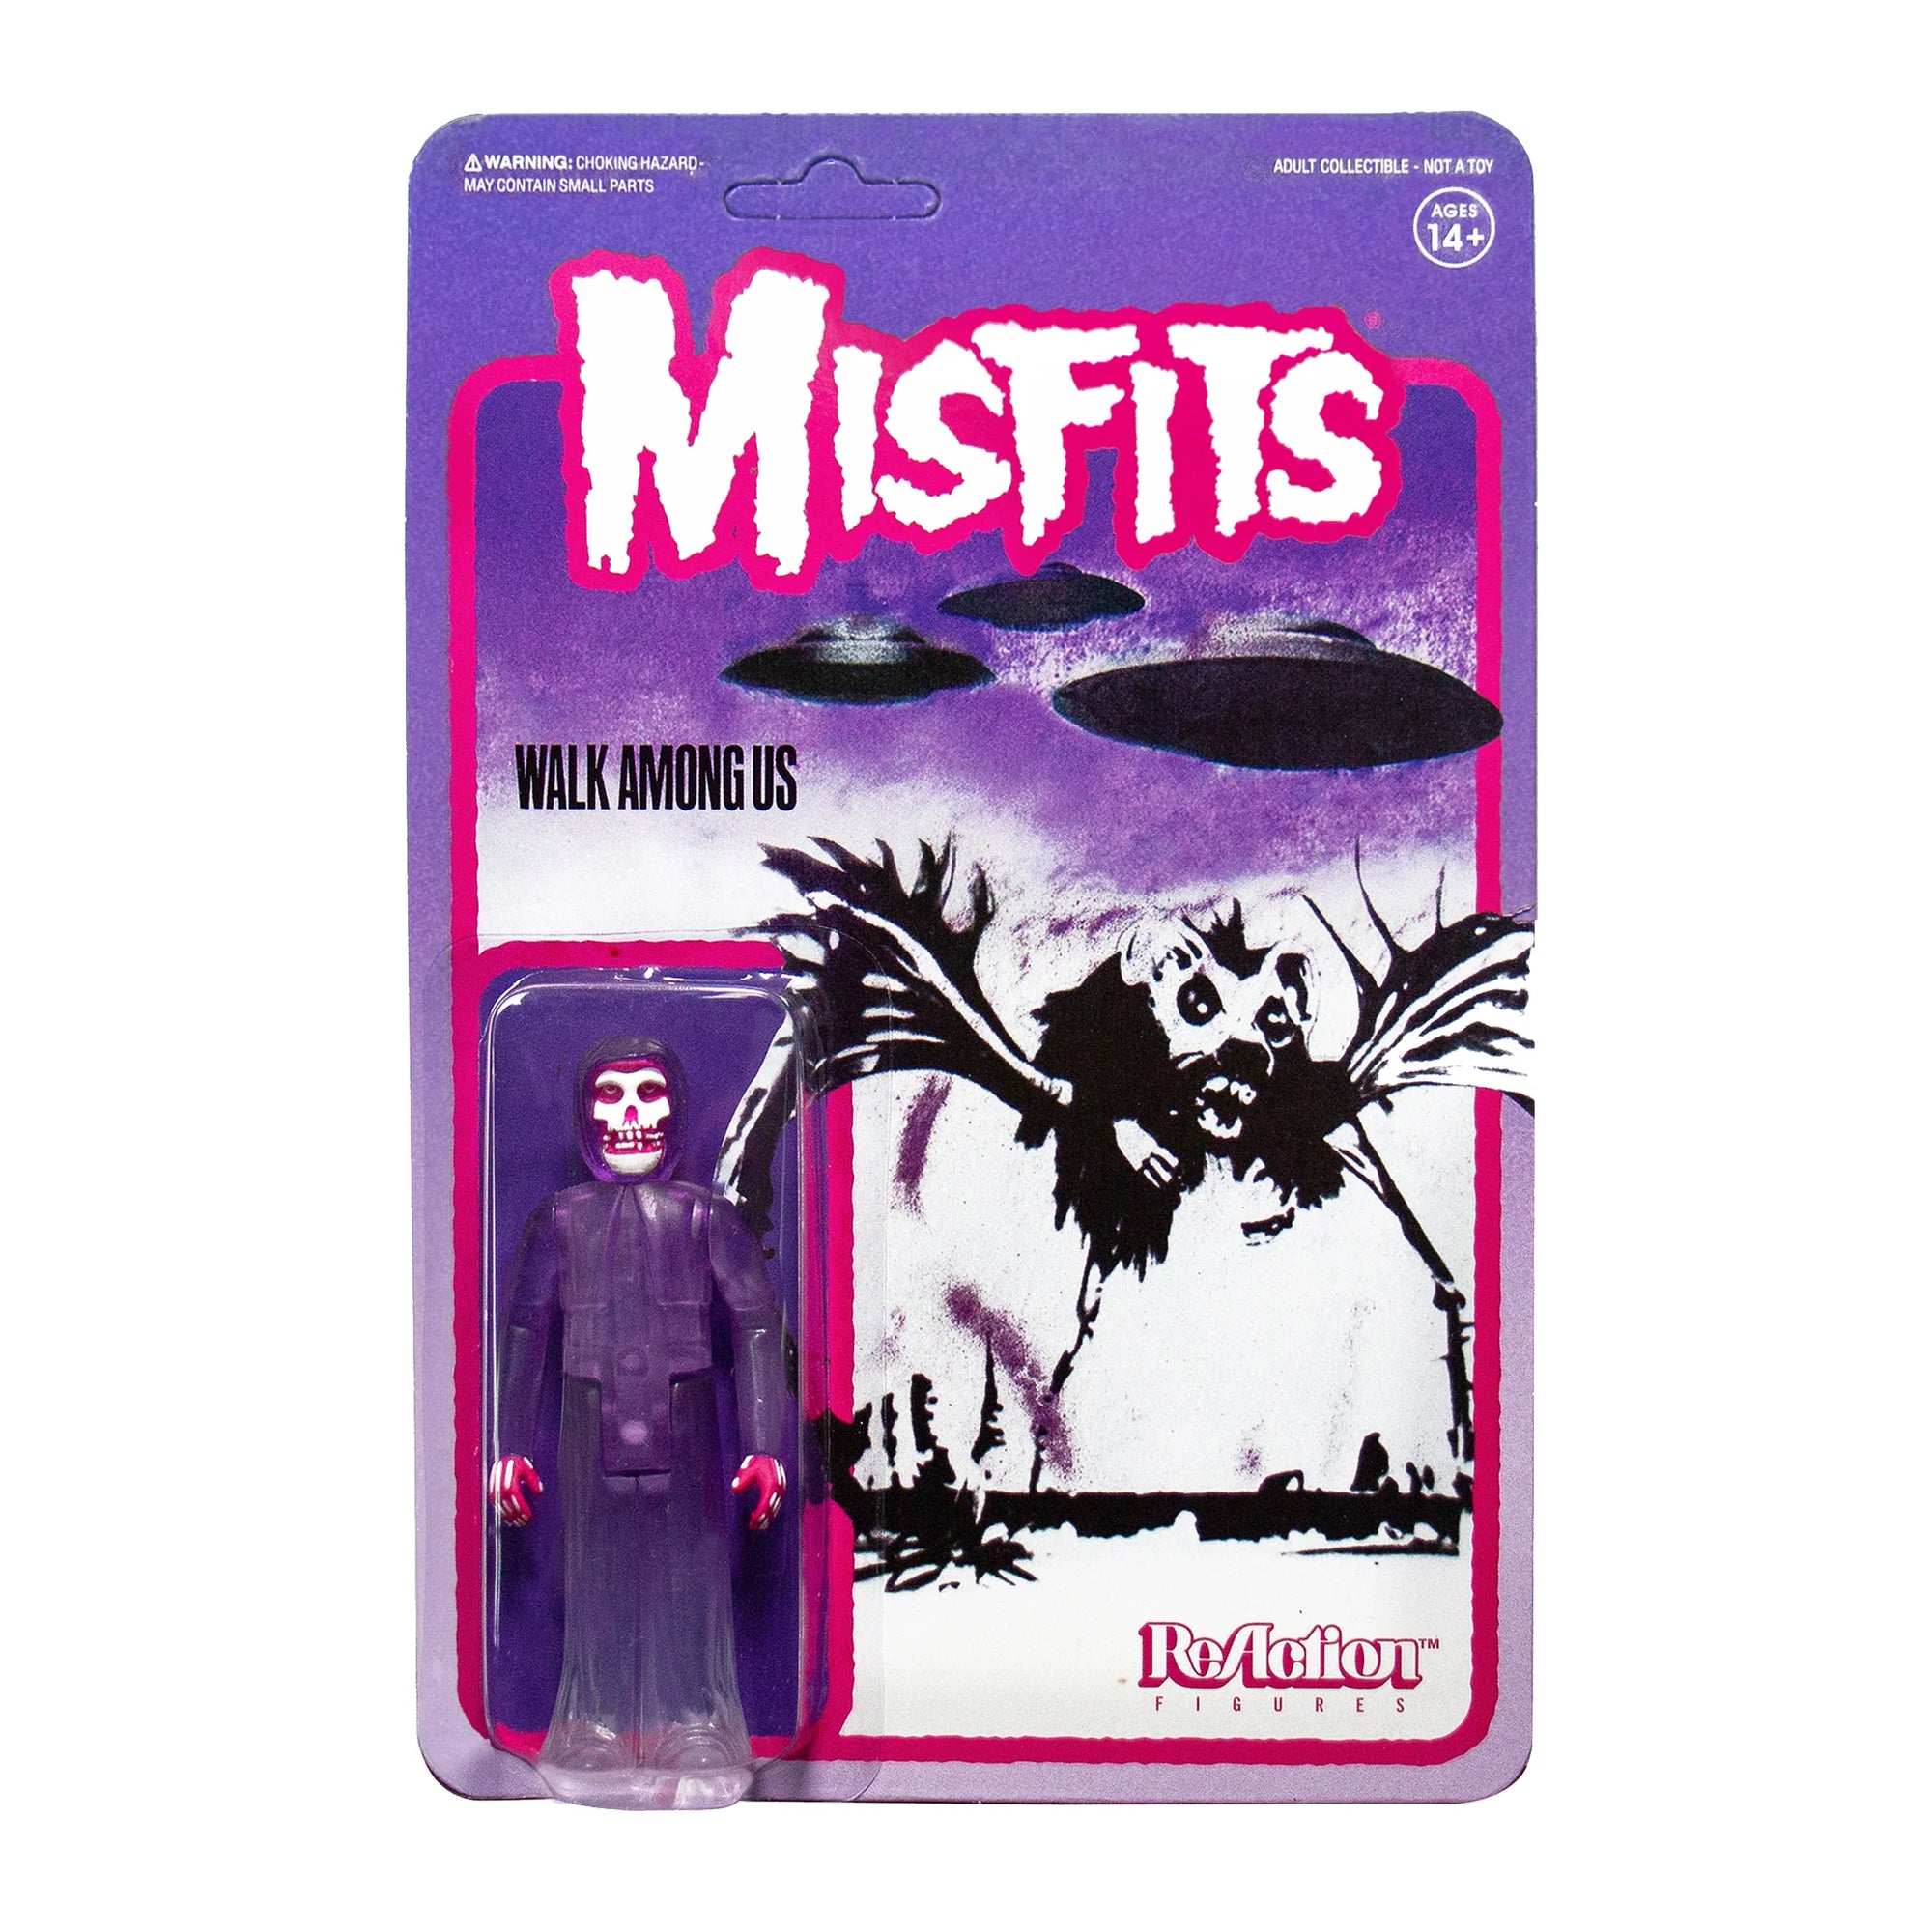 Misfits ReAction Figure - Fiend Walk Among Us (Purple) by Super7 *PUNCHED